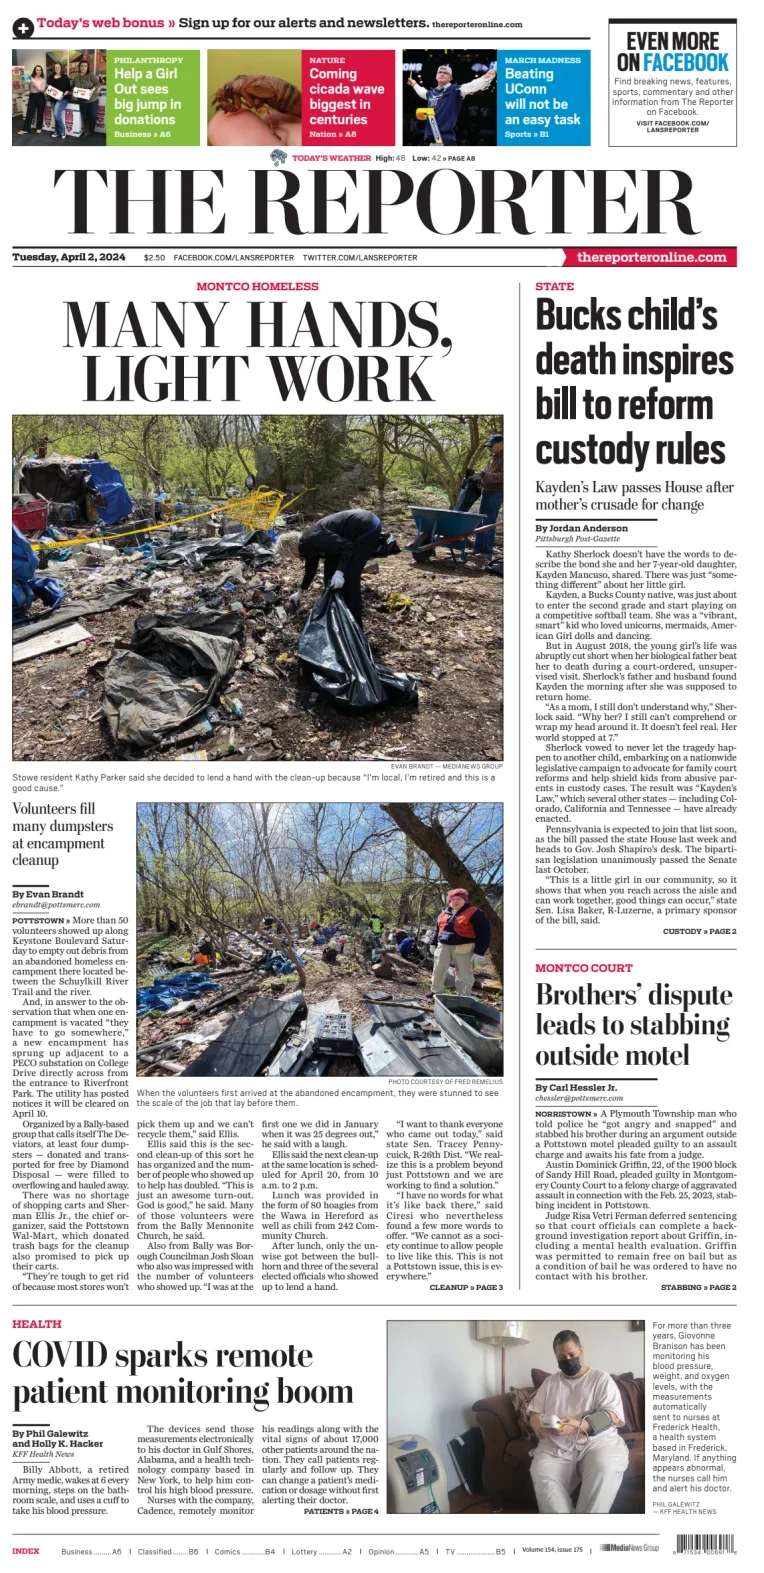 The Reporter (Lansdale, PA)